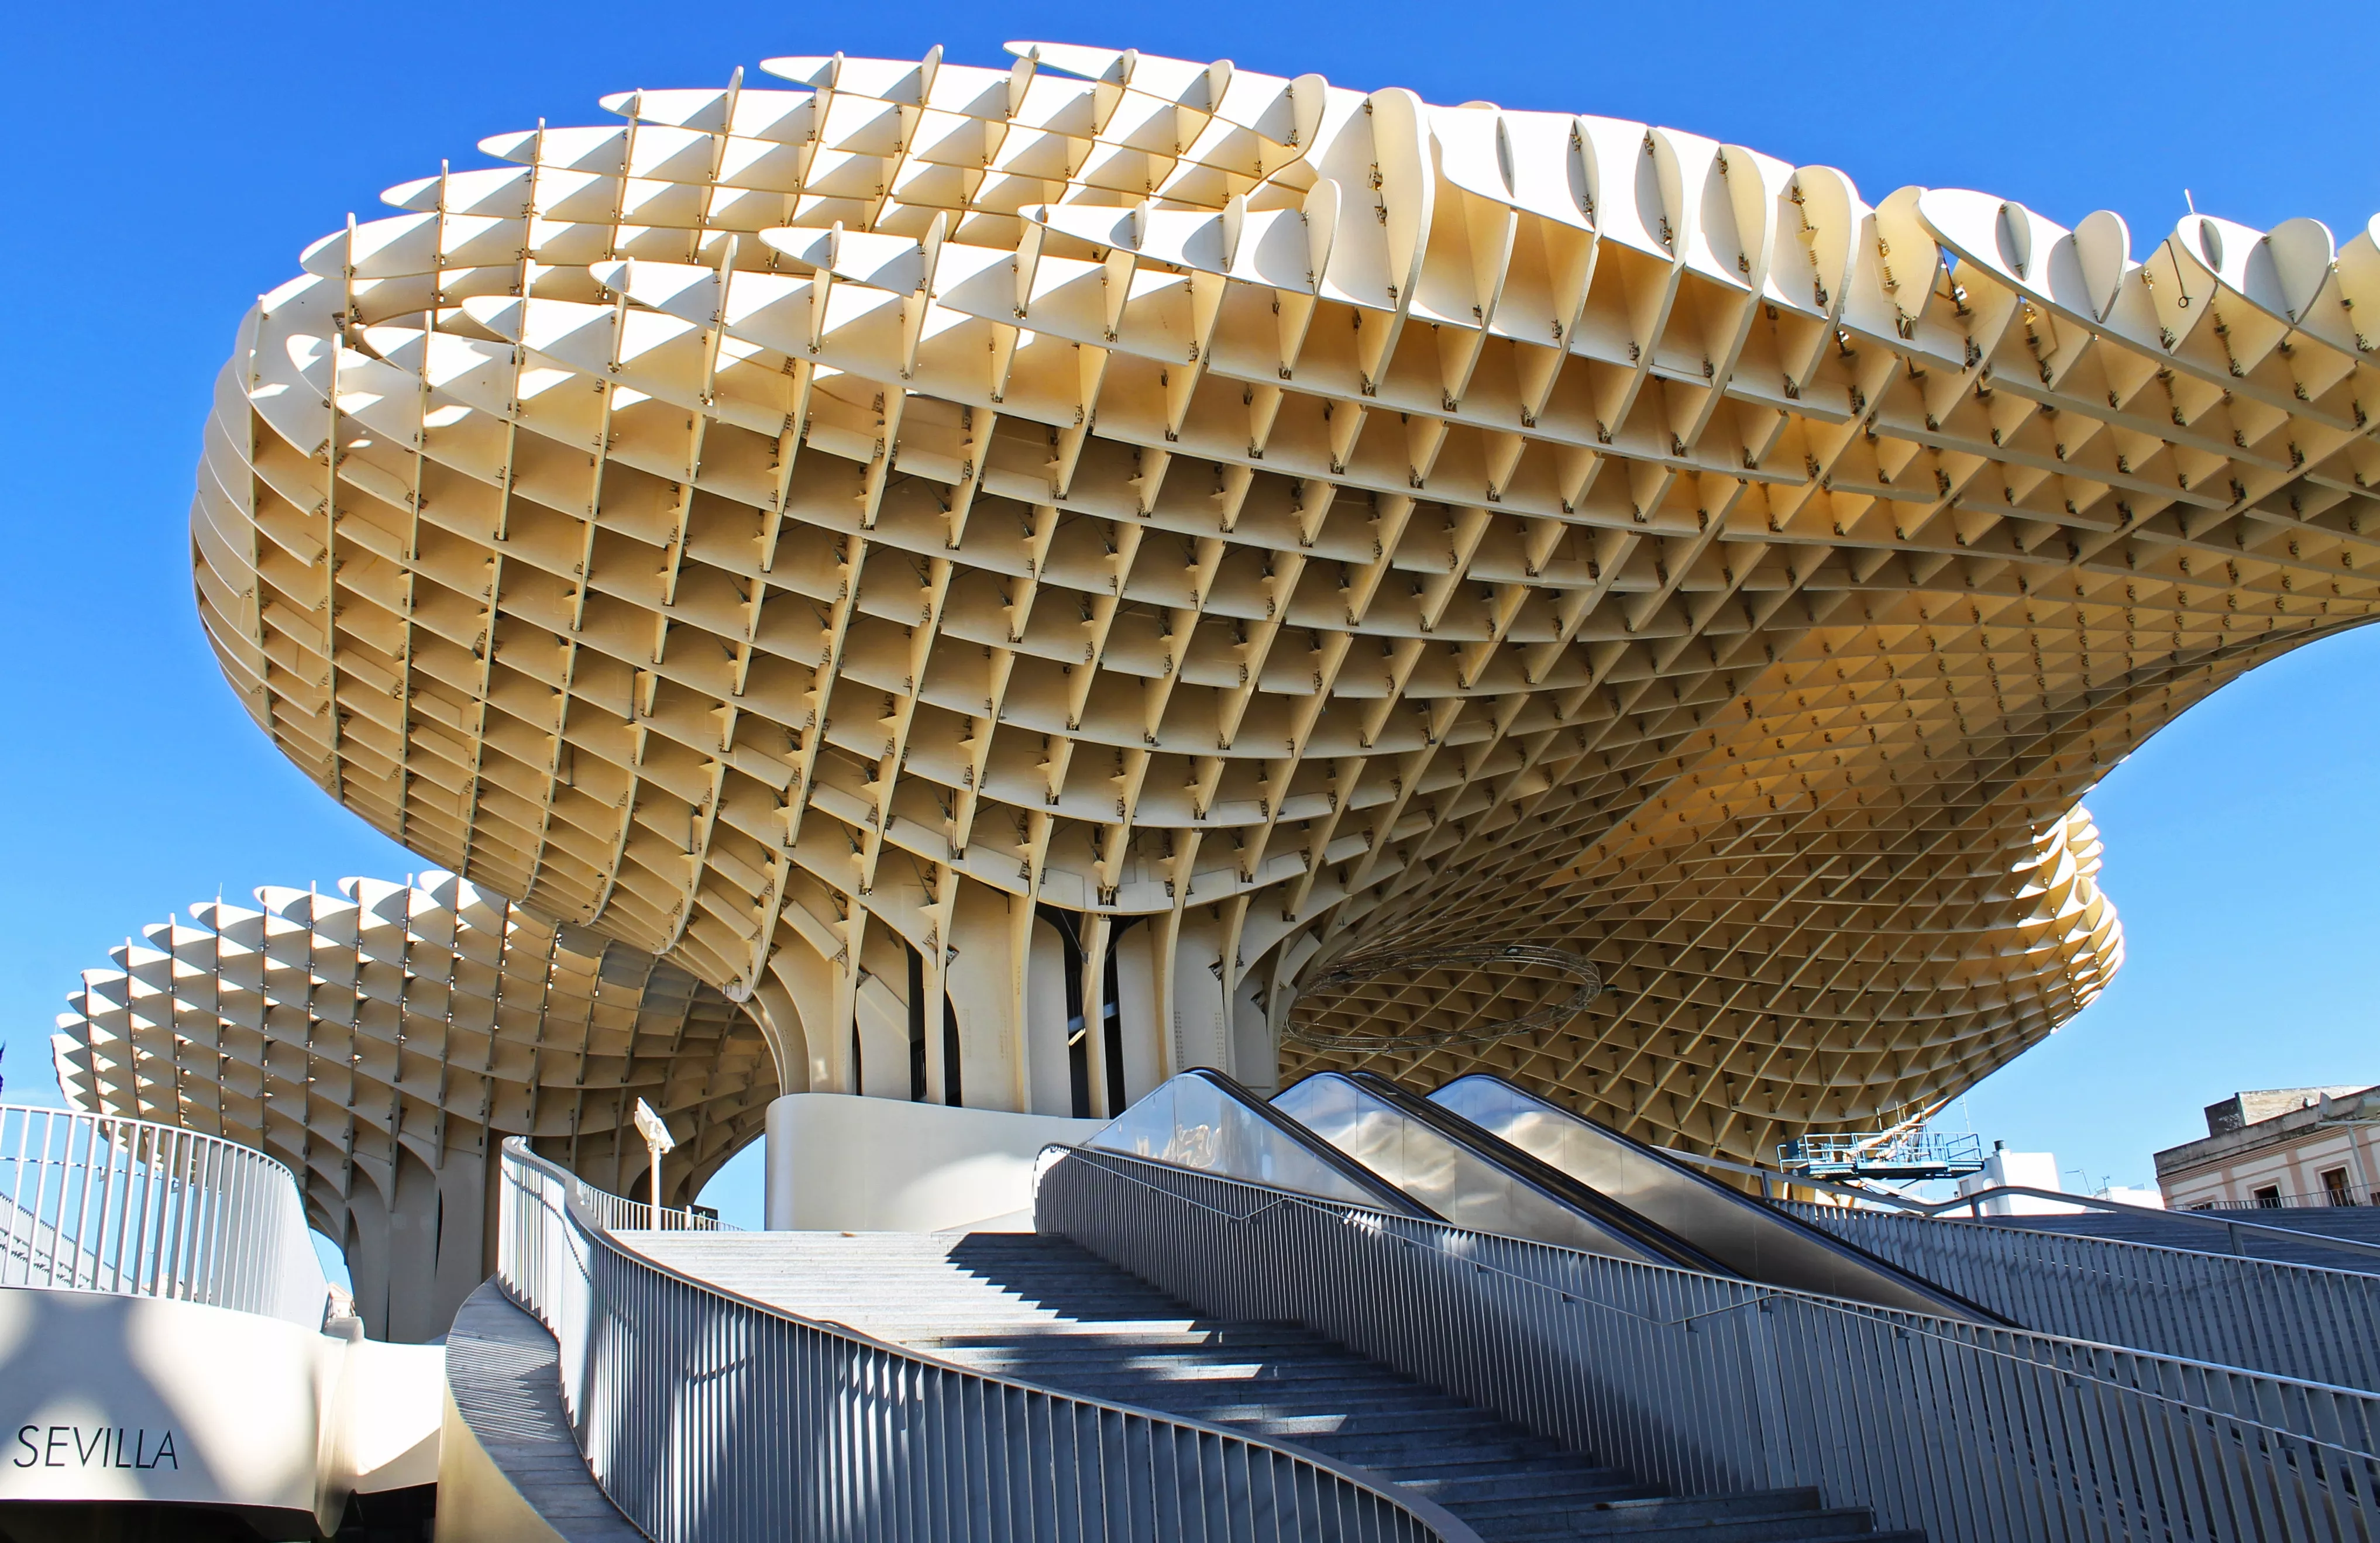 Metropol Parasol in Spain, Europe | Architecture - Rated 4.6